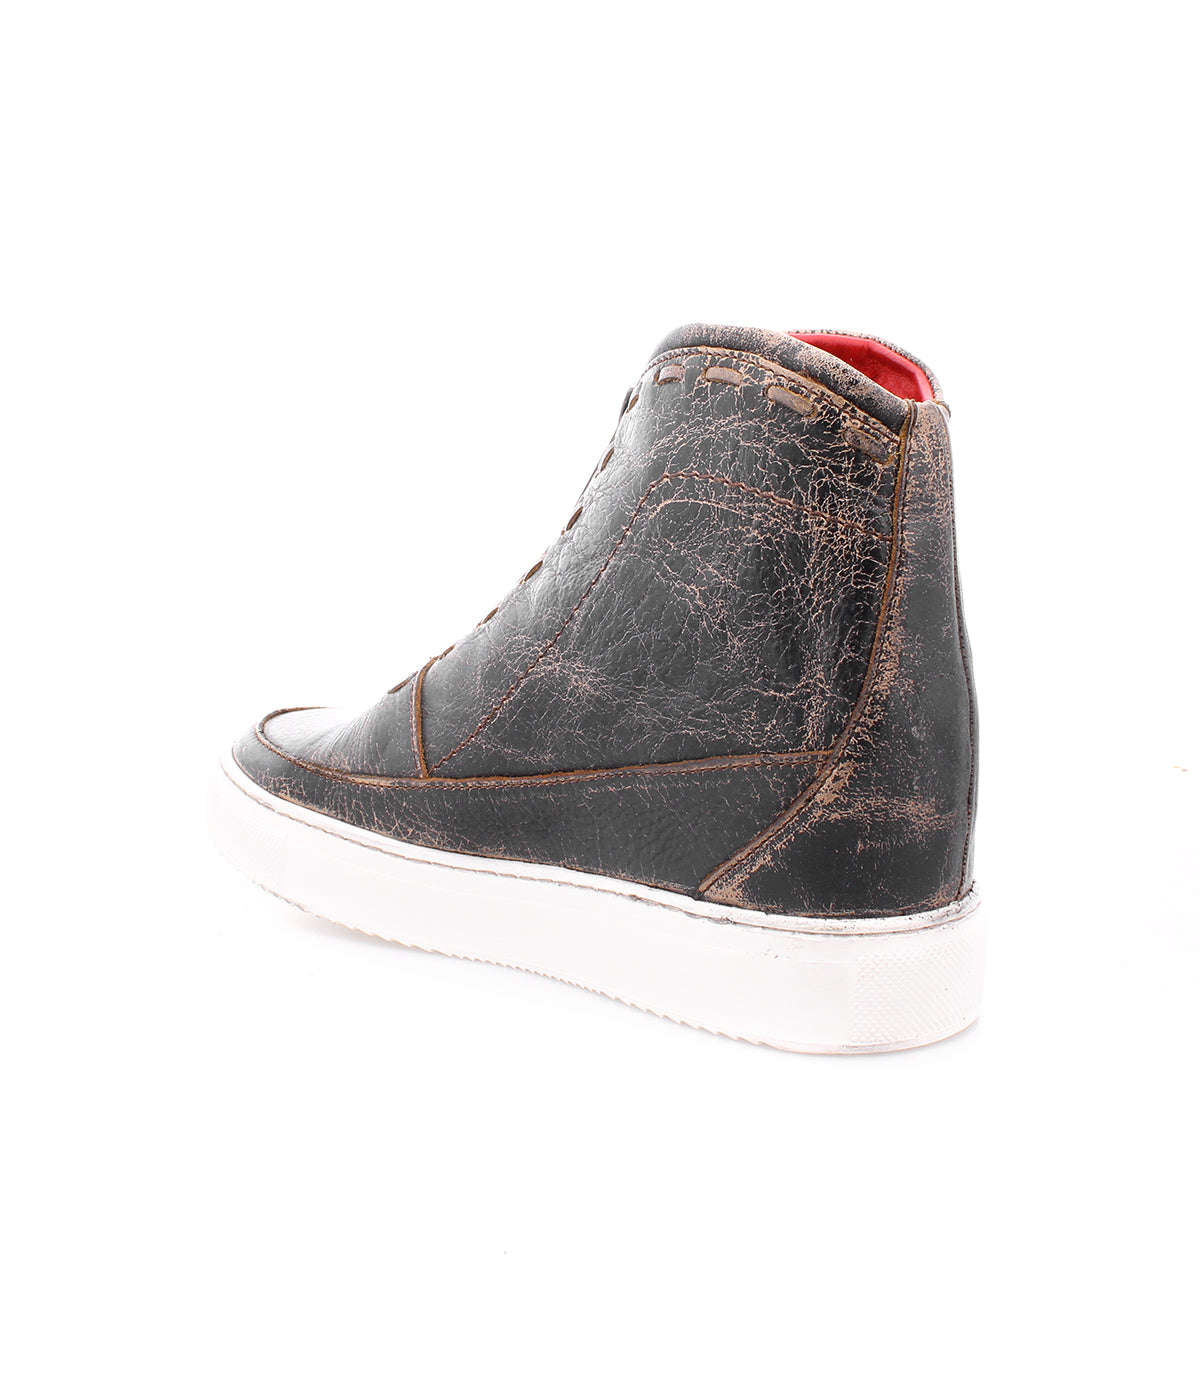 A comfortable black and white leather sneaker with a red sole, the Joyce by Bed Stu.